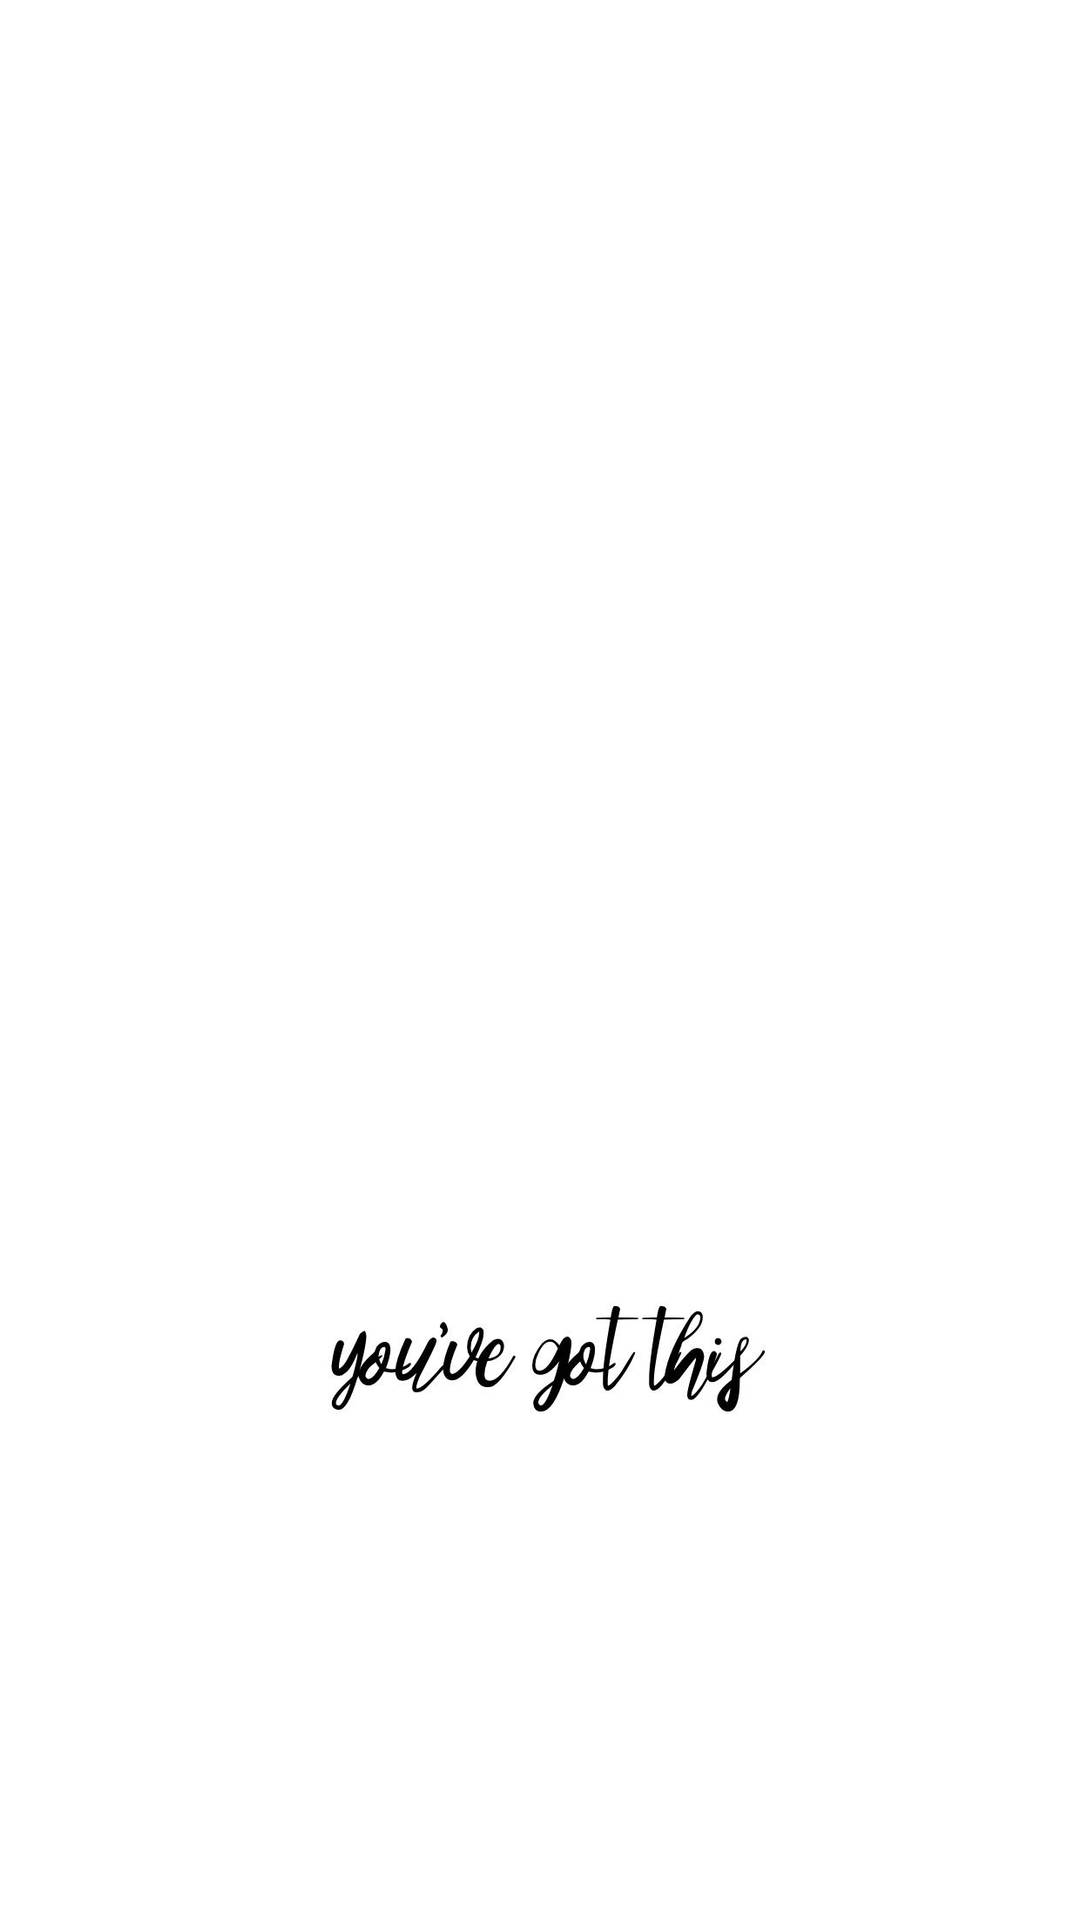 Motivational Cool Iphone White Background